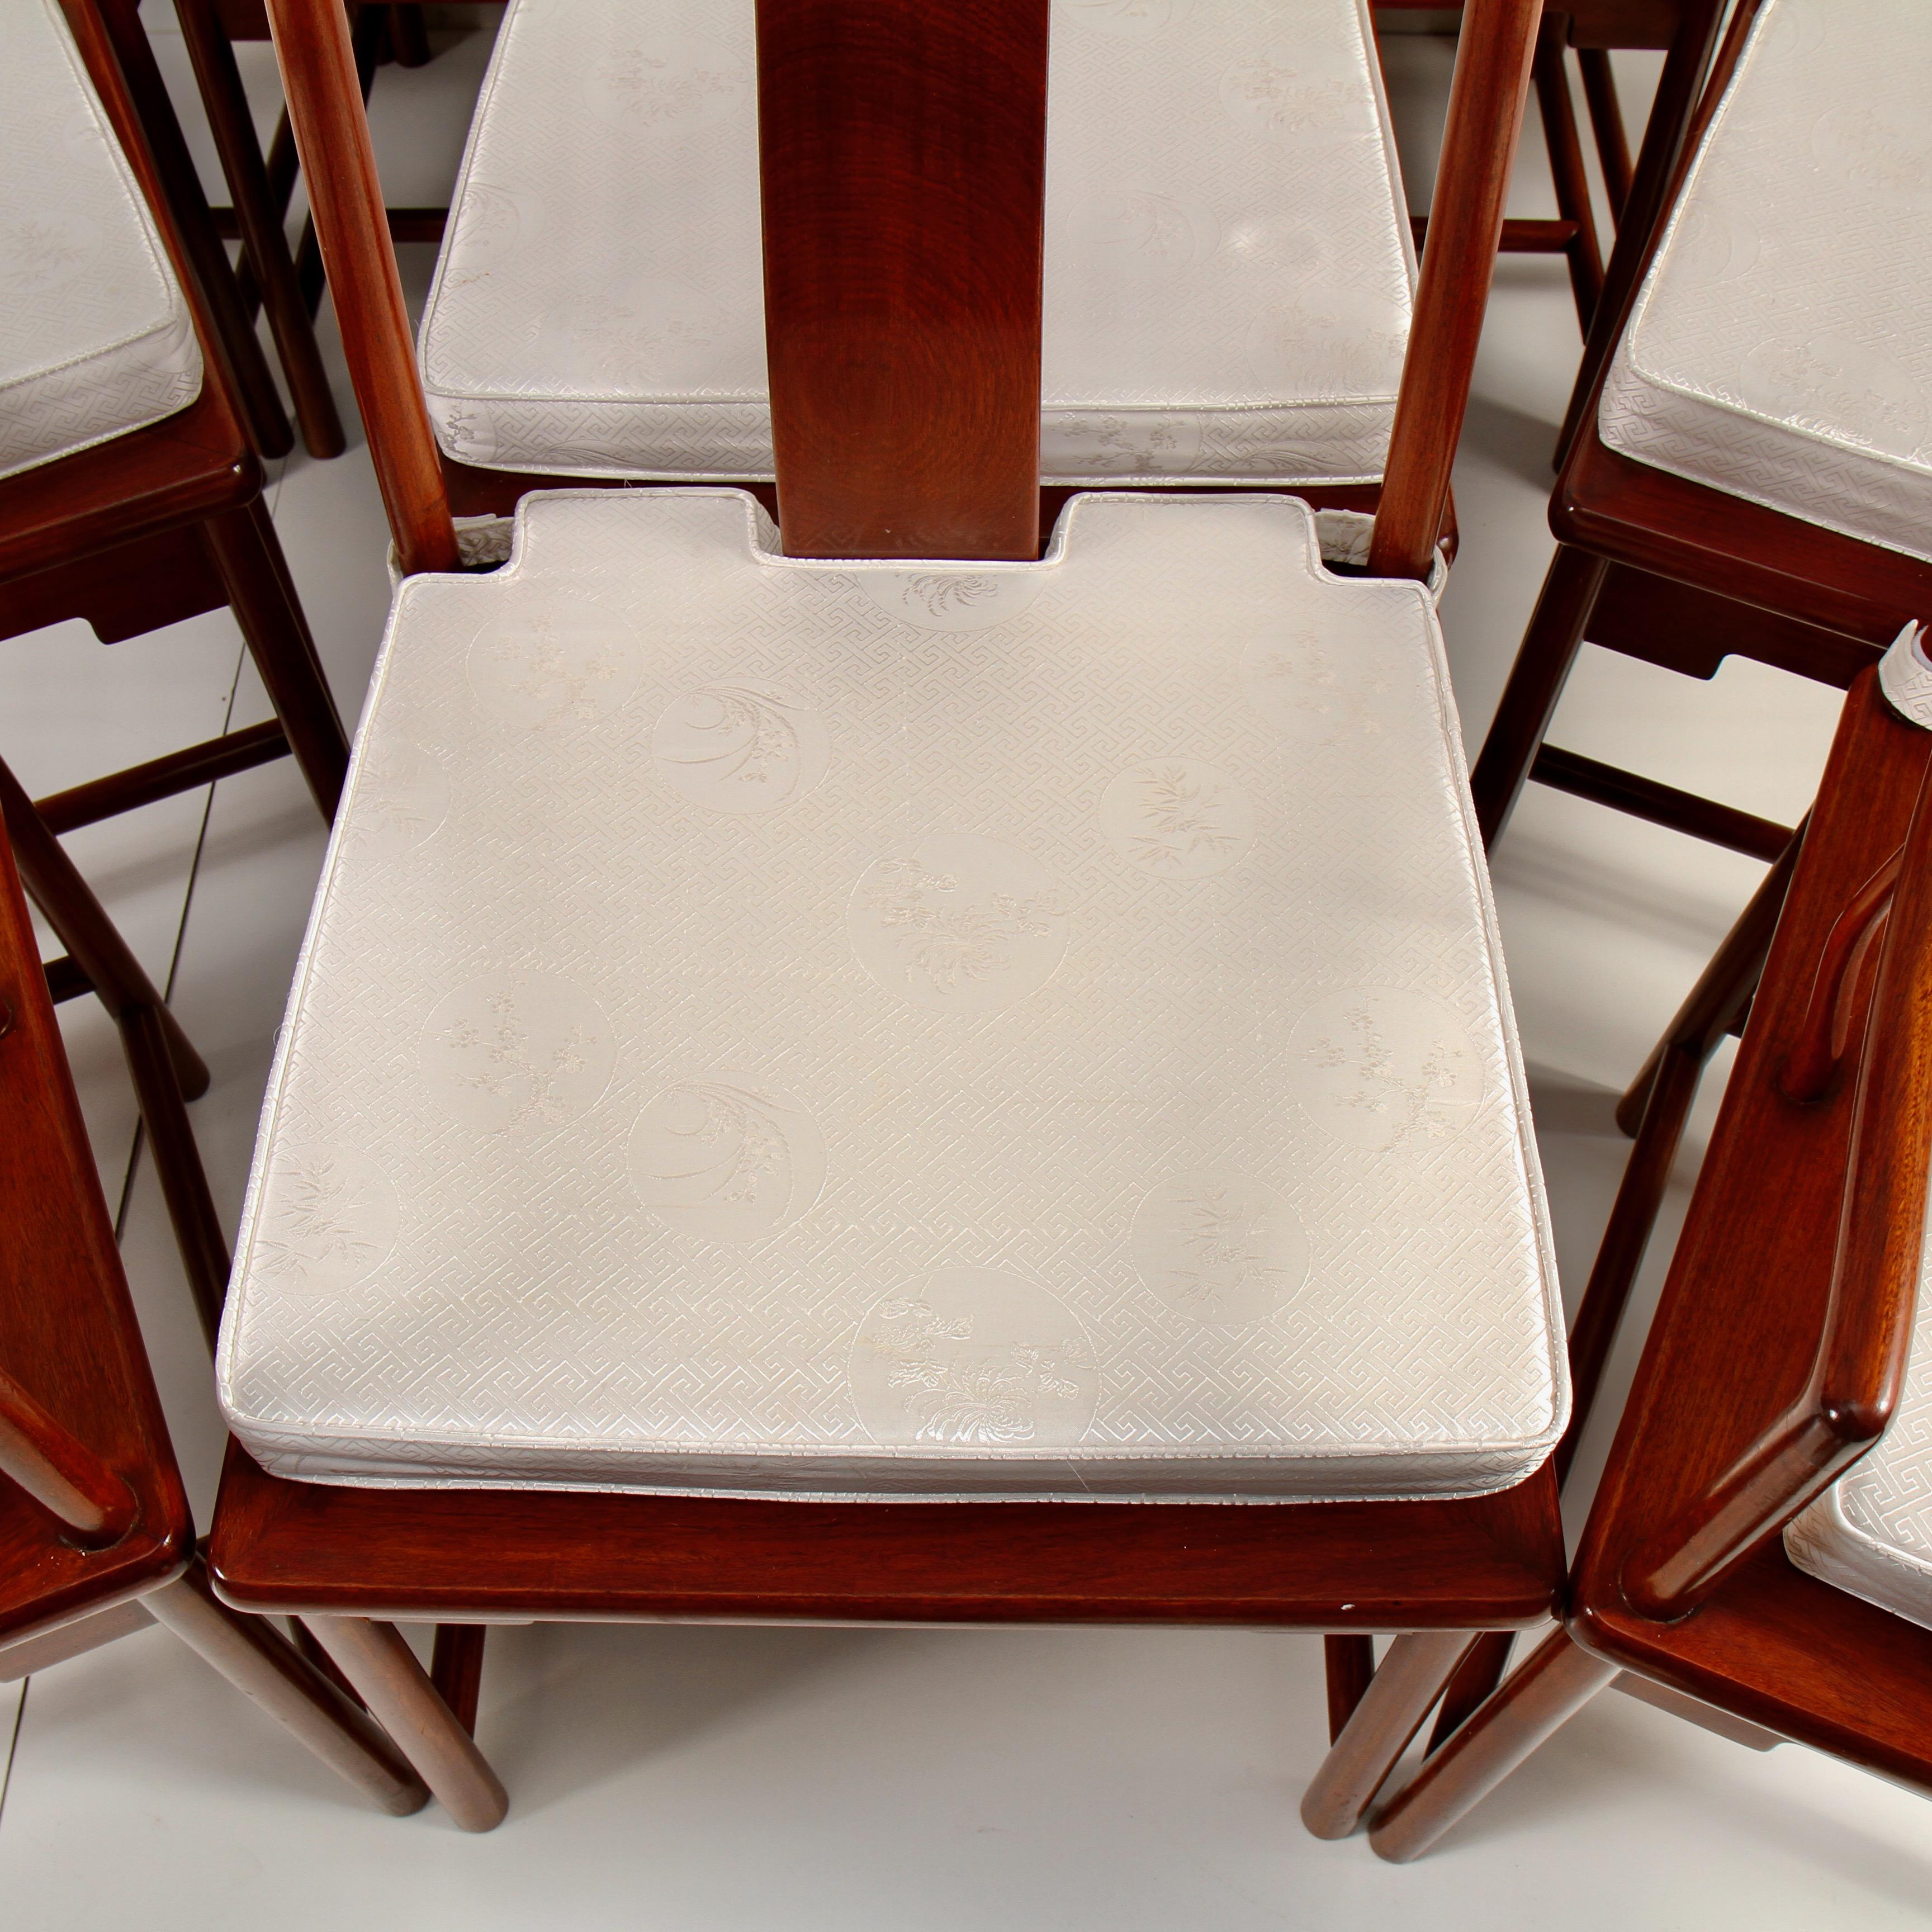 Chinese Export Midcentury Chinese Rosewood Dining Chairs